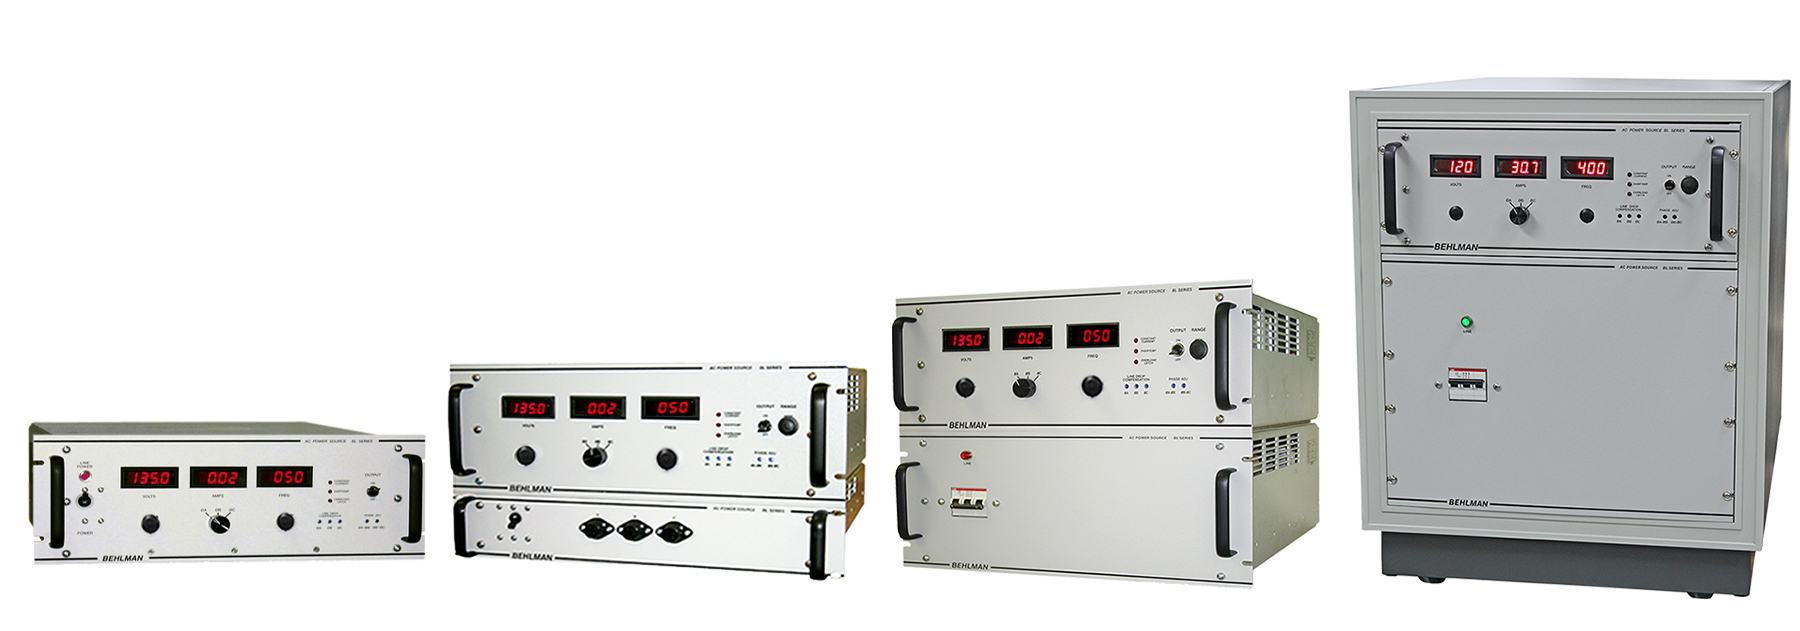 Behlman BL(F) High-Power Series Power Sources include fifteen basic fixed voltage and frequency models ranging from 1,000 to 20,000 VA. Options list enables these to be customized for any requirement.